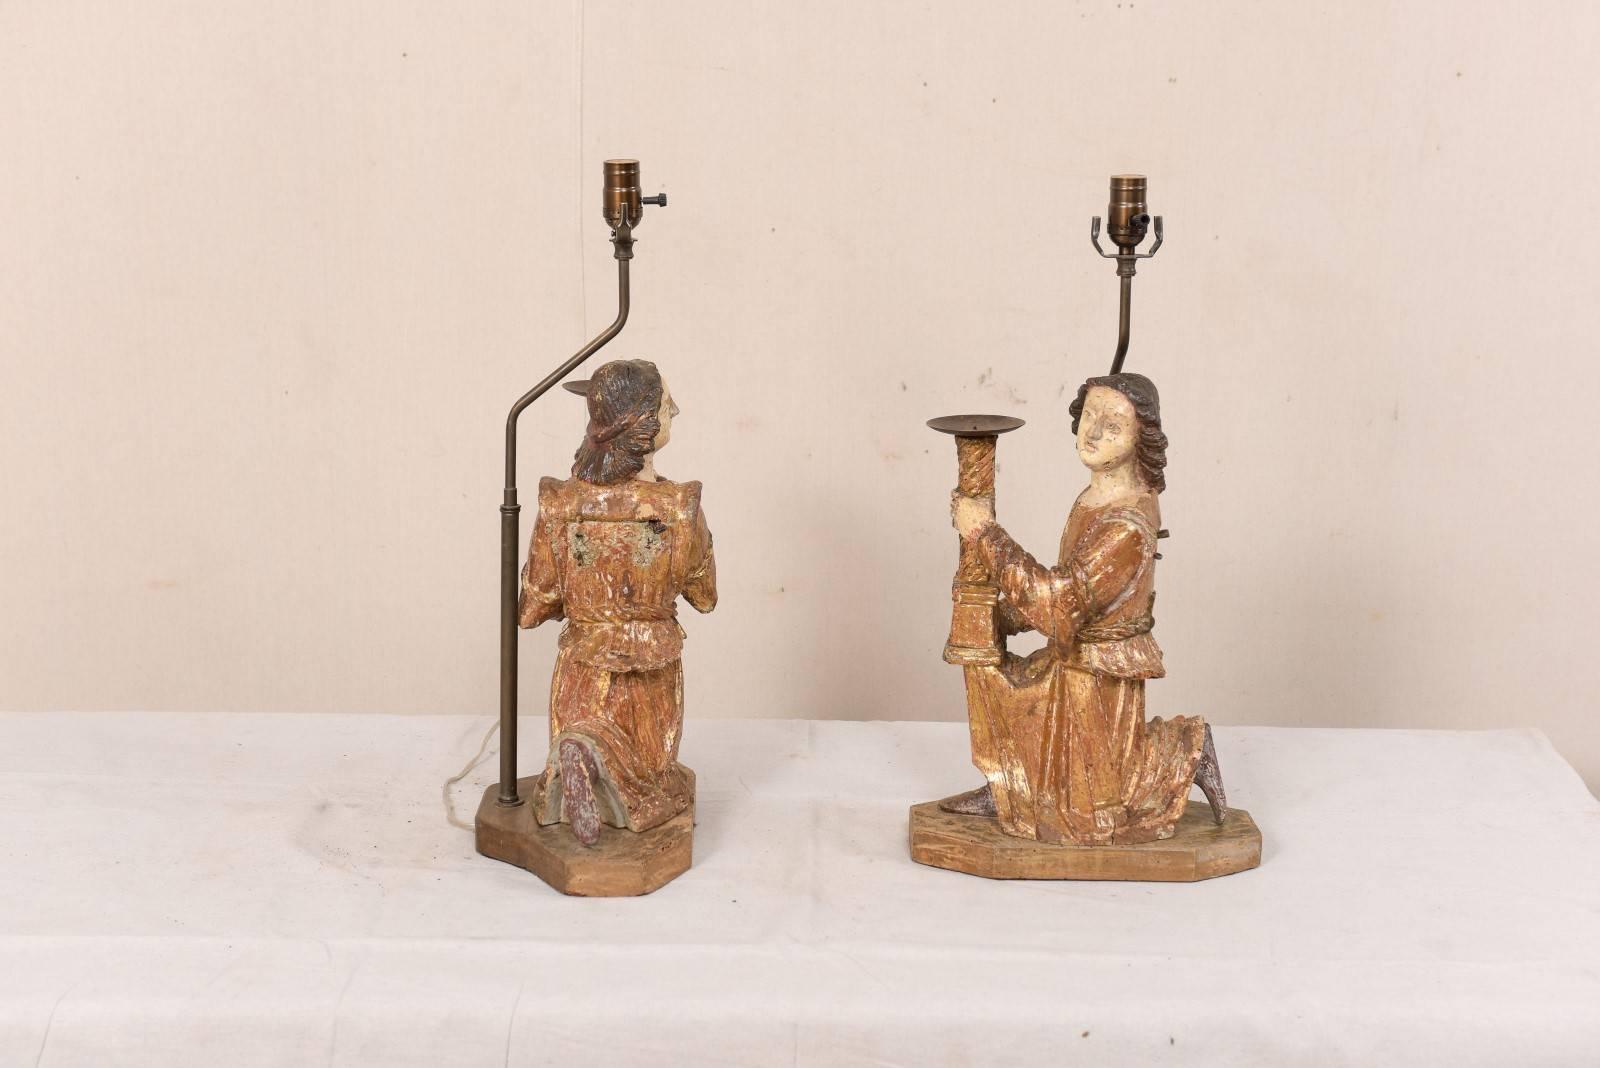 Pair of 18th Century Italian Hand-Carved and Painted Wood Figurative Table Lamps For Sale 4